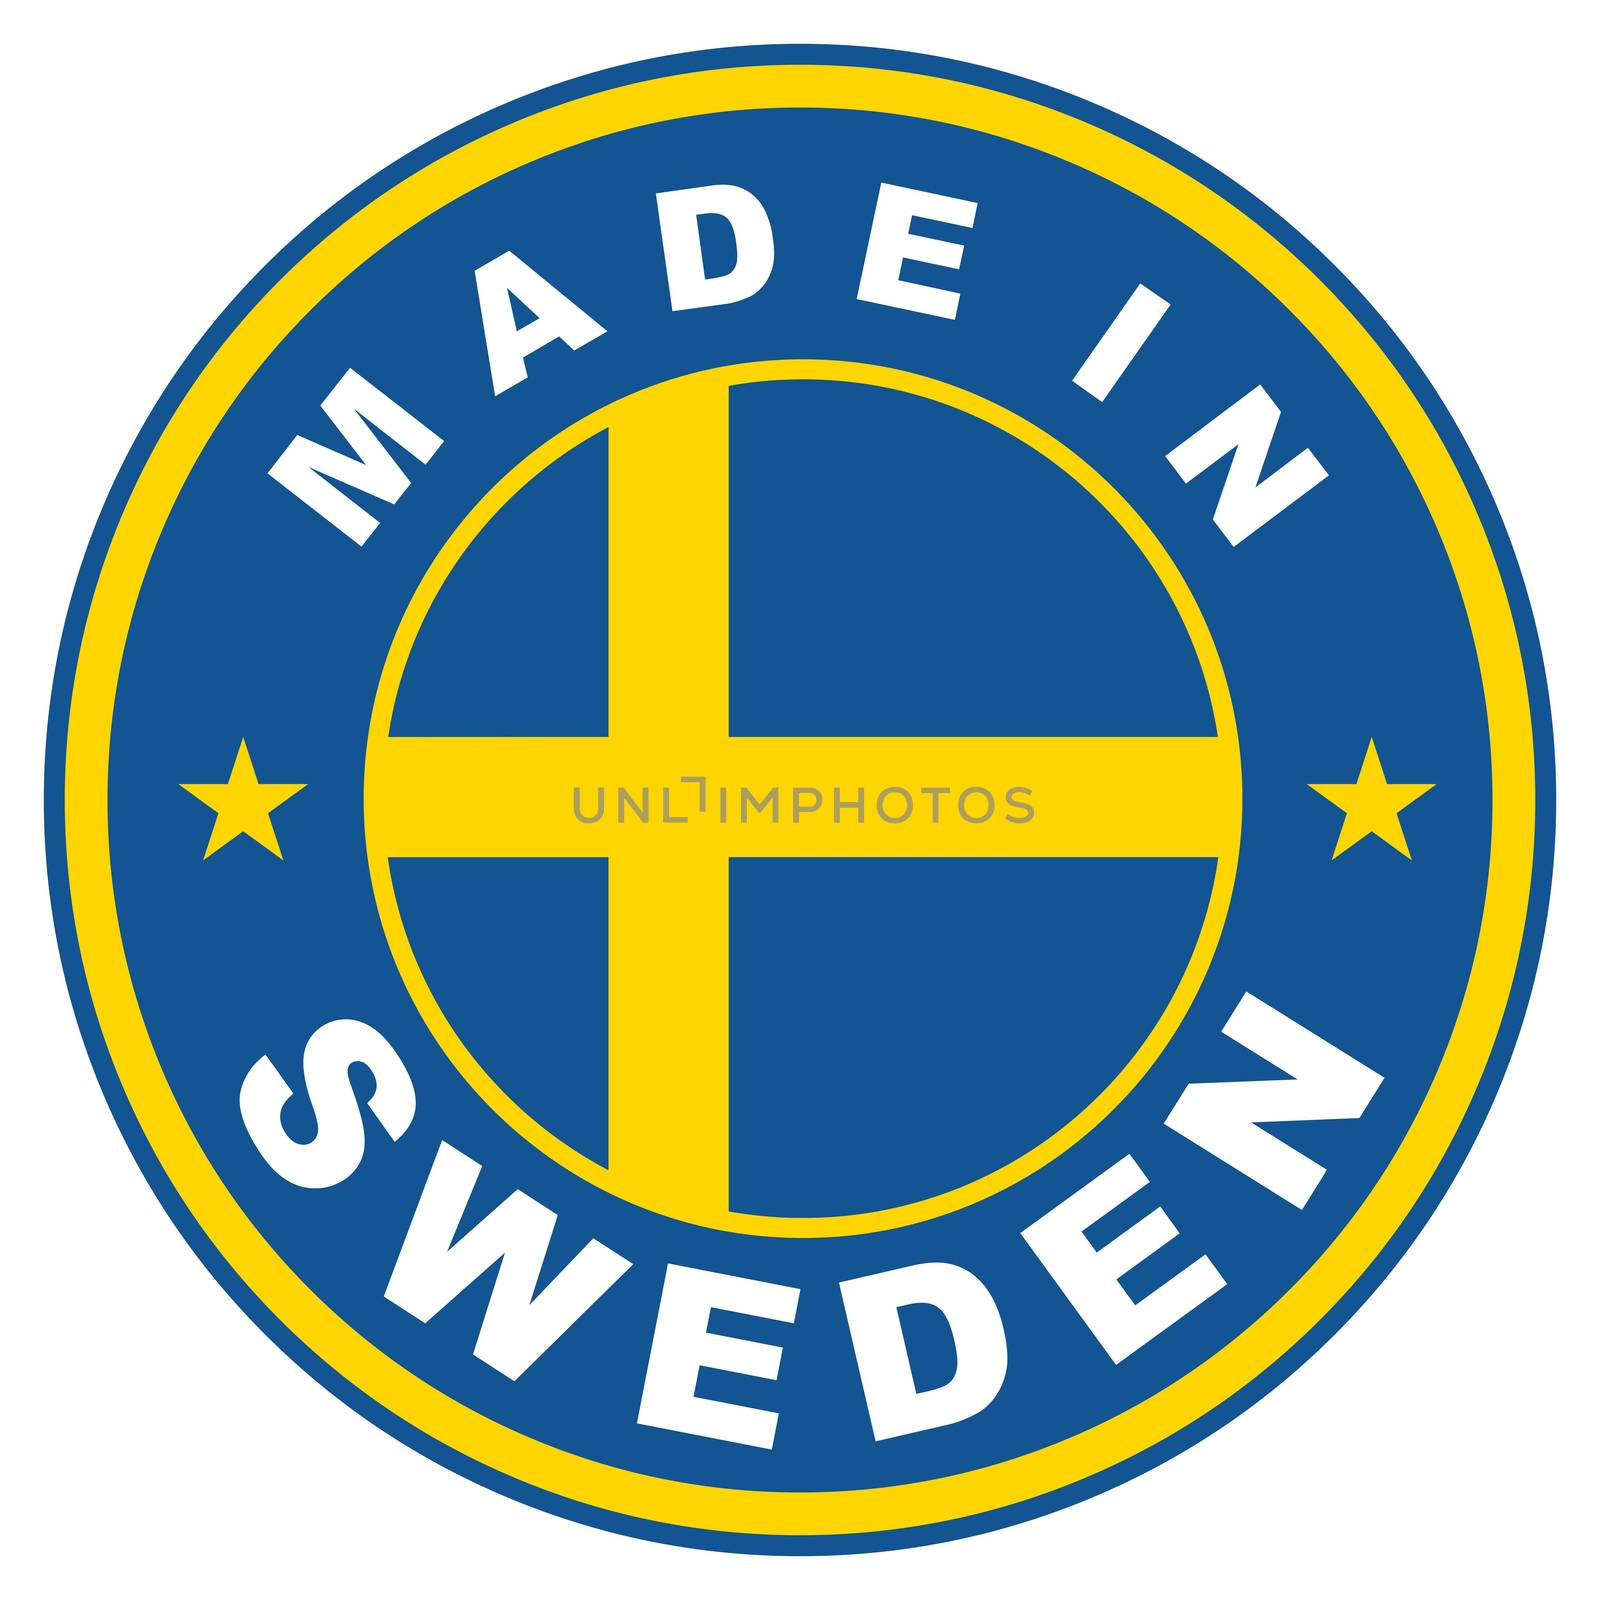 made in sweden by tony4urban